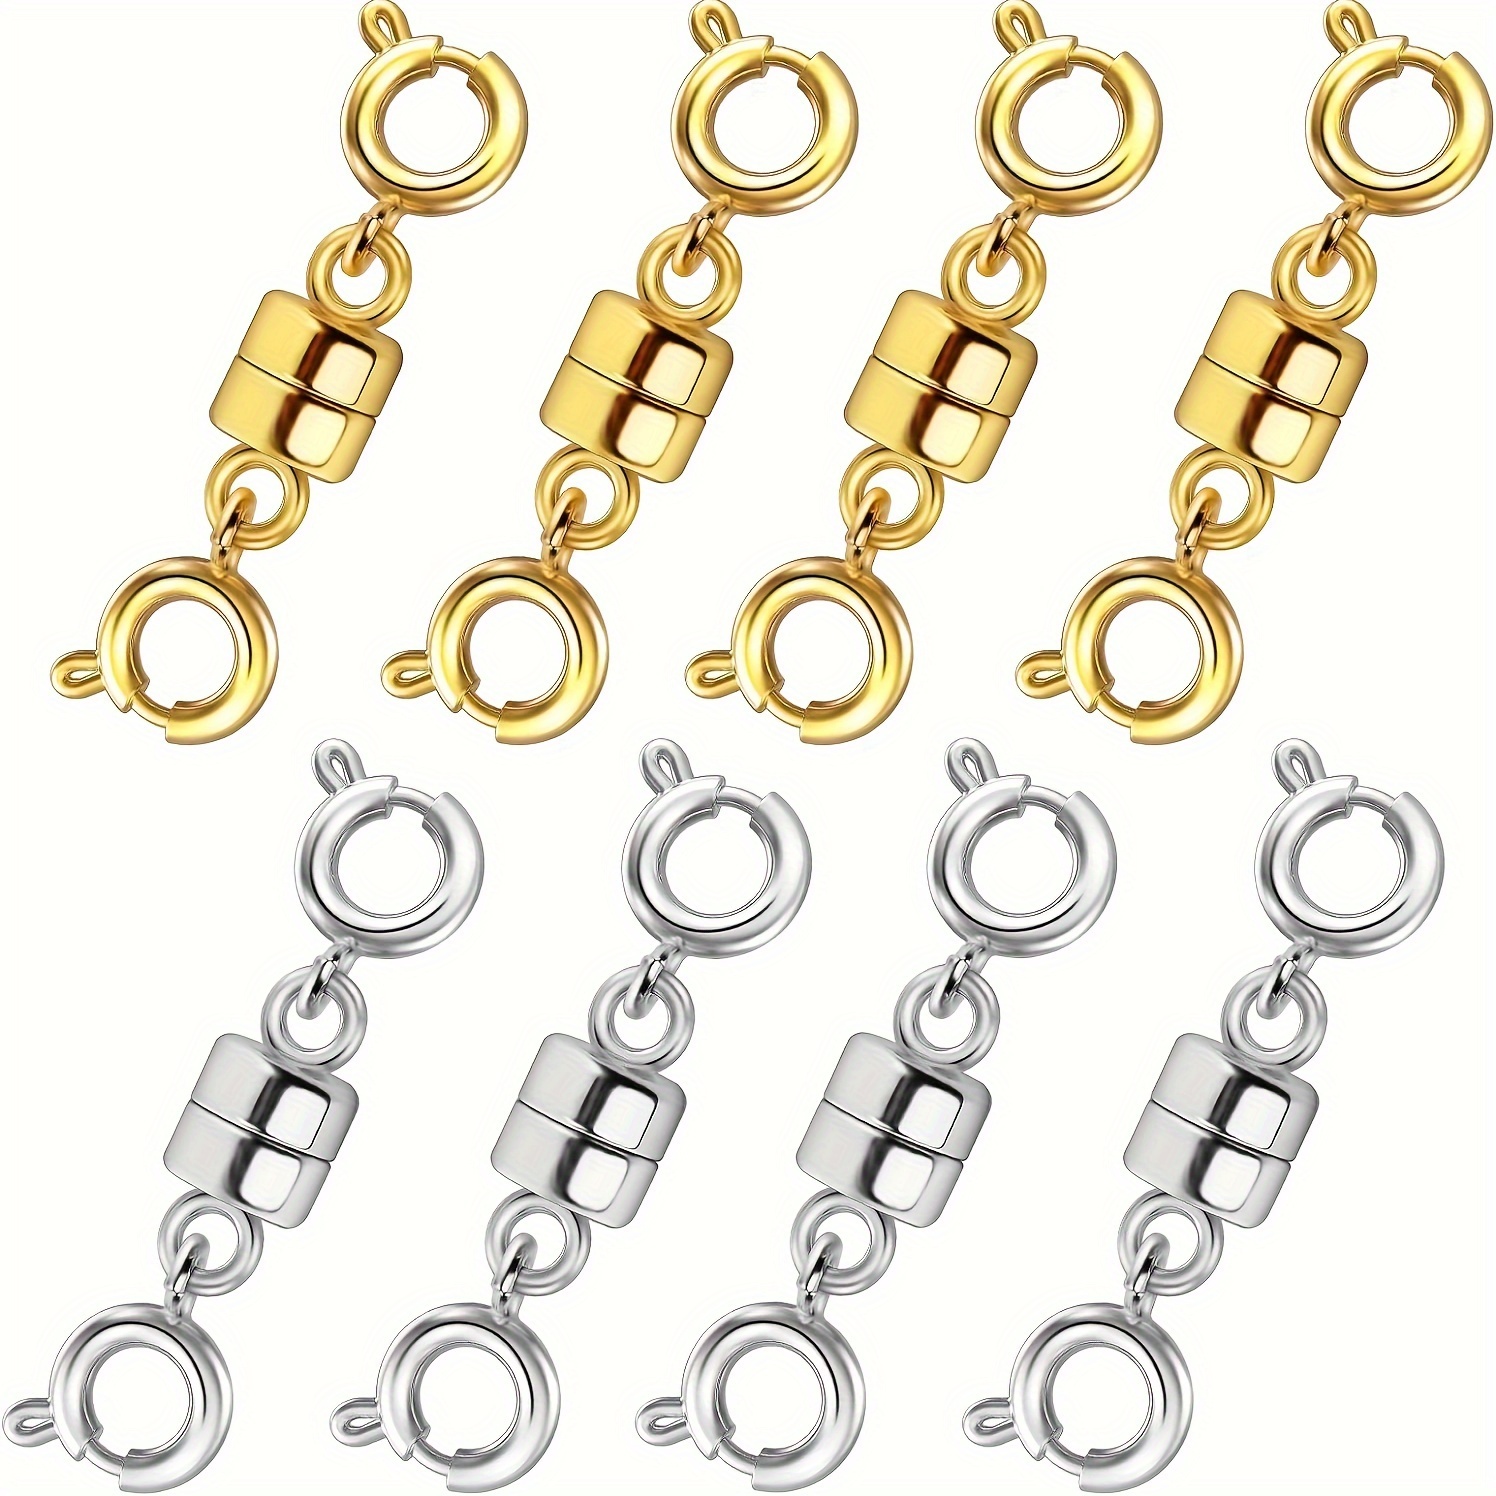 12pcs Magnetic Lobster Clasps for Jewelry Necklace Bracelet, TSV Locking Magnetic Jewelry Clasp Round Necklace Closures Bracelet Extender for Jewelry